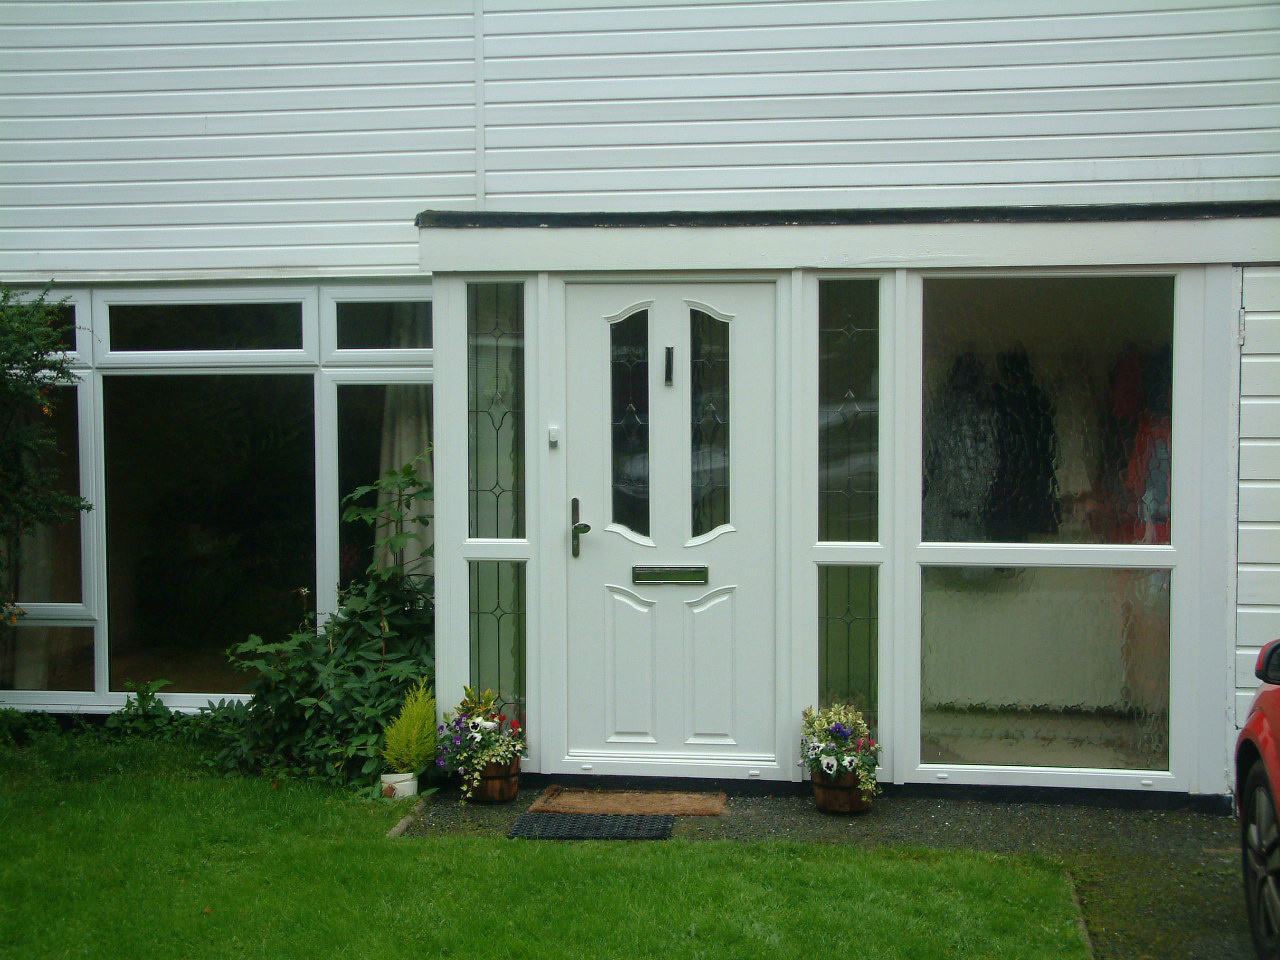 WHITE APEER APL2 COMPOSITE FRONT DOOR FITTED BY ASGARD WINDOWS IN DUBLIN 22.